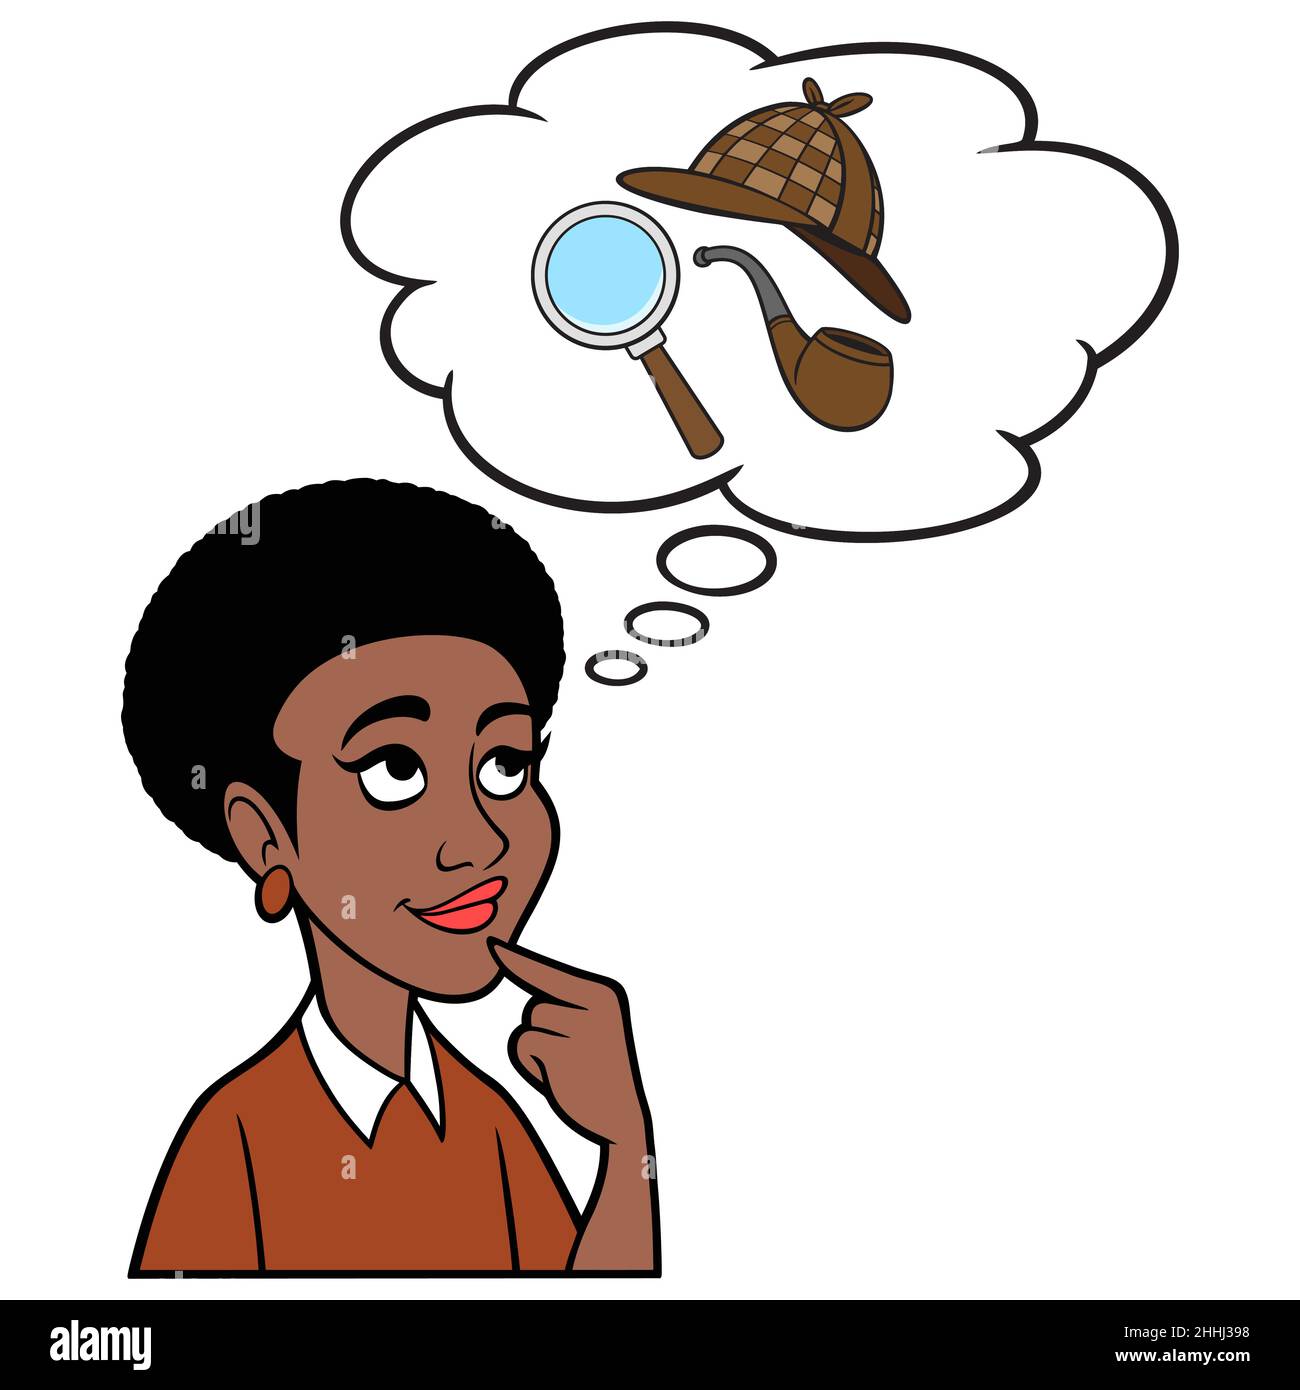 Black Woman thinking about Detective Work - A cartoon illustration of a Black Woman thinking about doing some Detective Work. Stock Vector